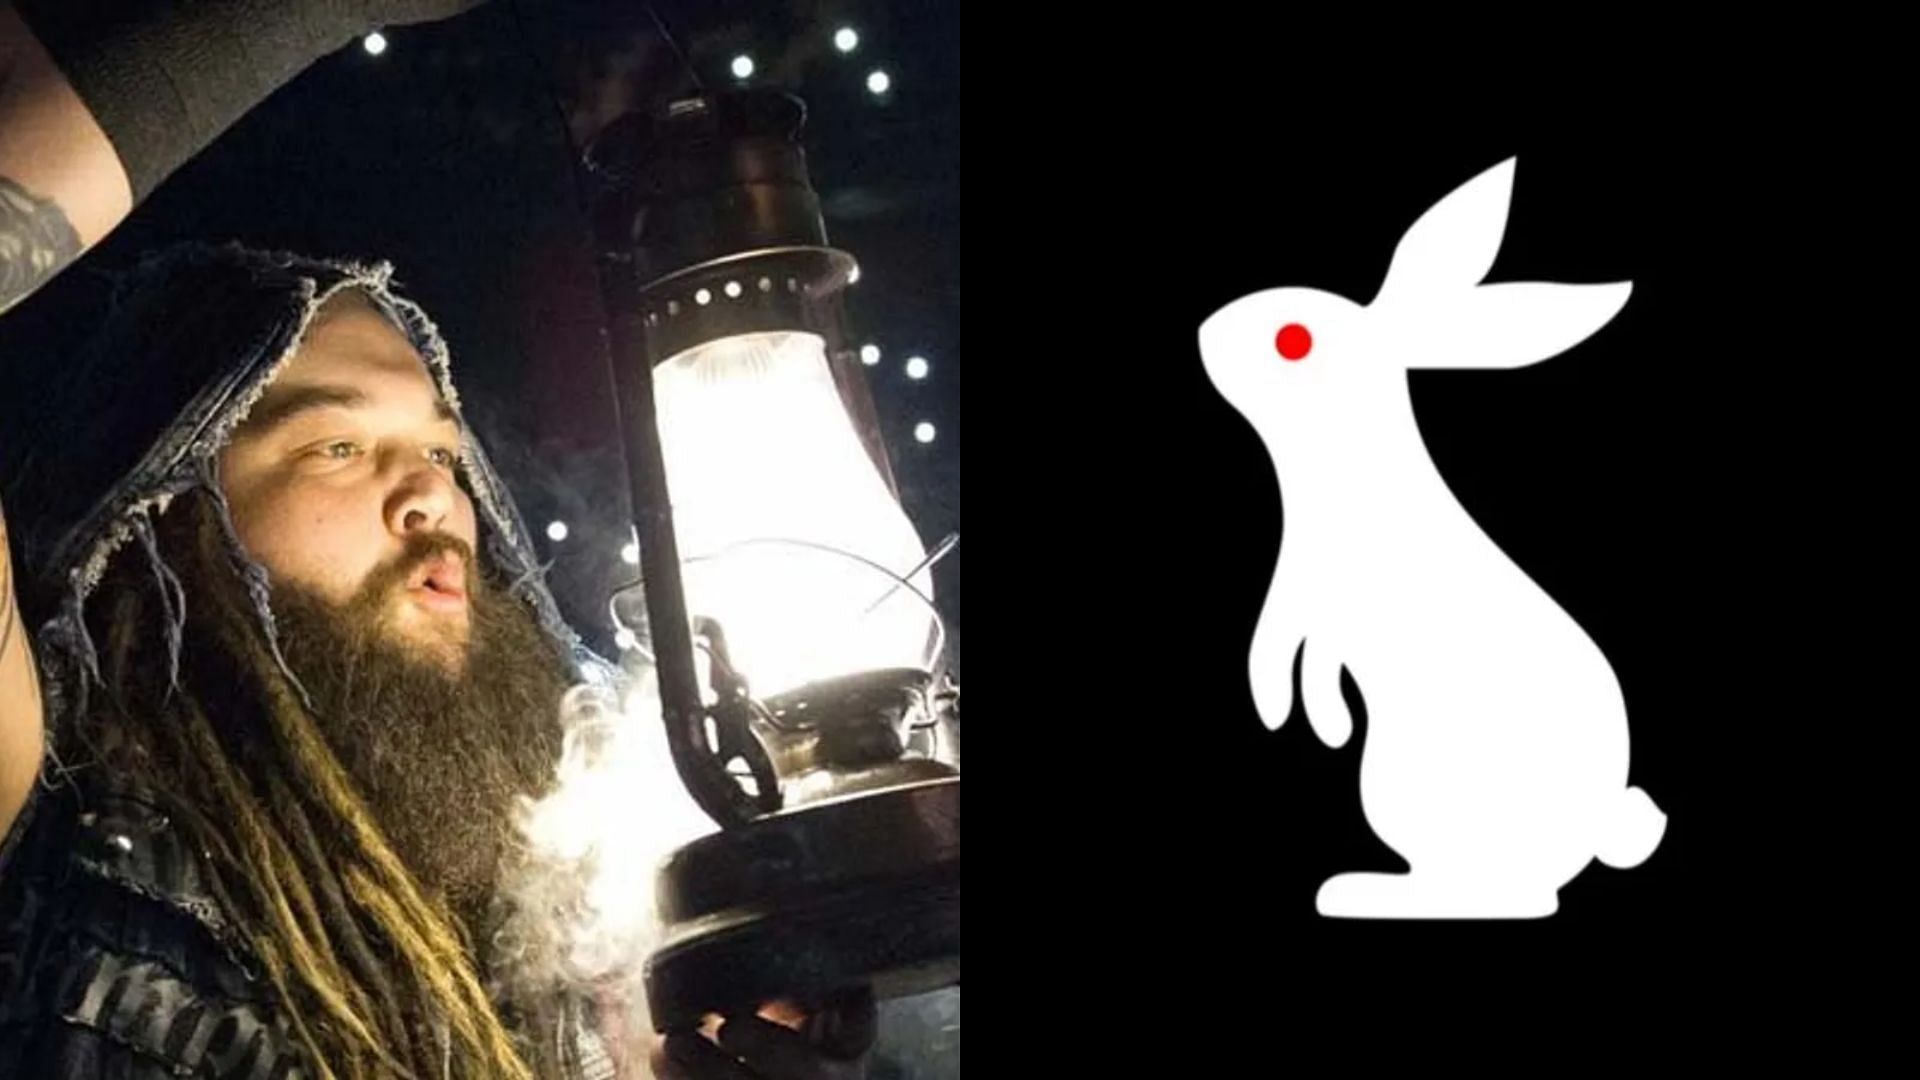 Could we see Bray Wyatt unveiled as the White Rabbit at WWE Extreme Rules 2022?